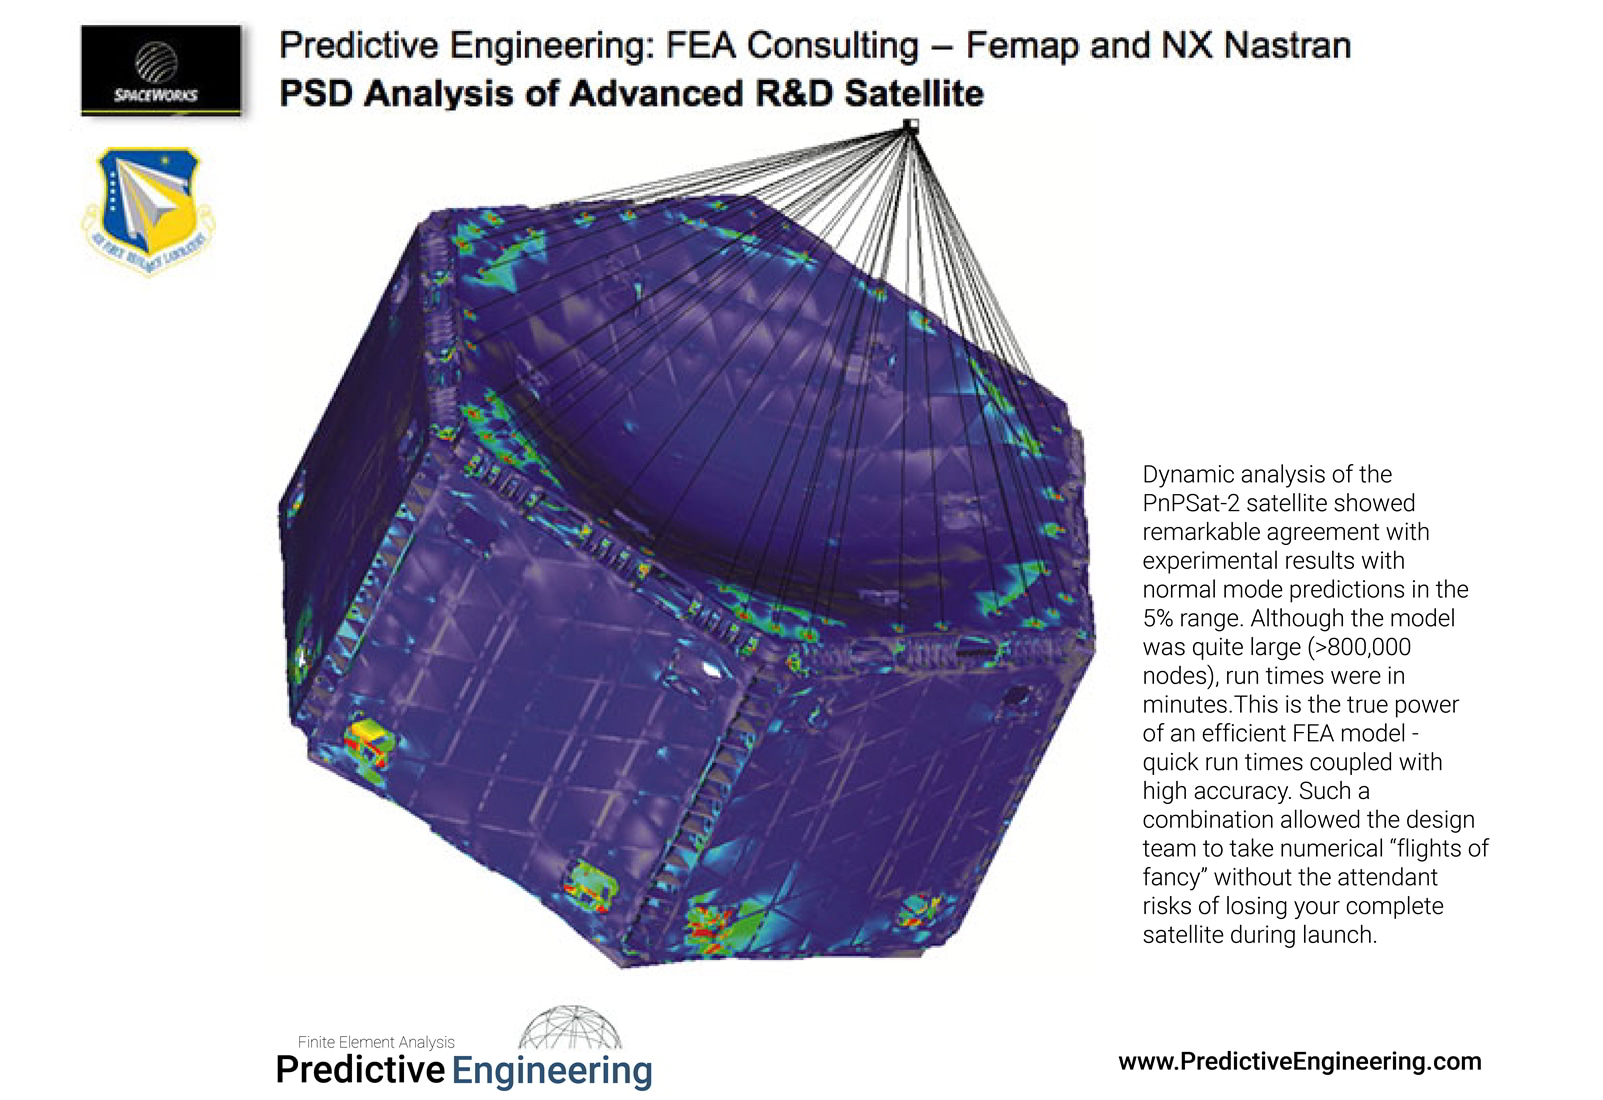 Dynamic analysis of the PnPSat-2 satellite showed remarkable agreement with experimental results with normal mode predictions in the 5% range - Predictive Engineering FEA Services